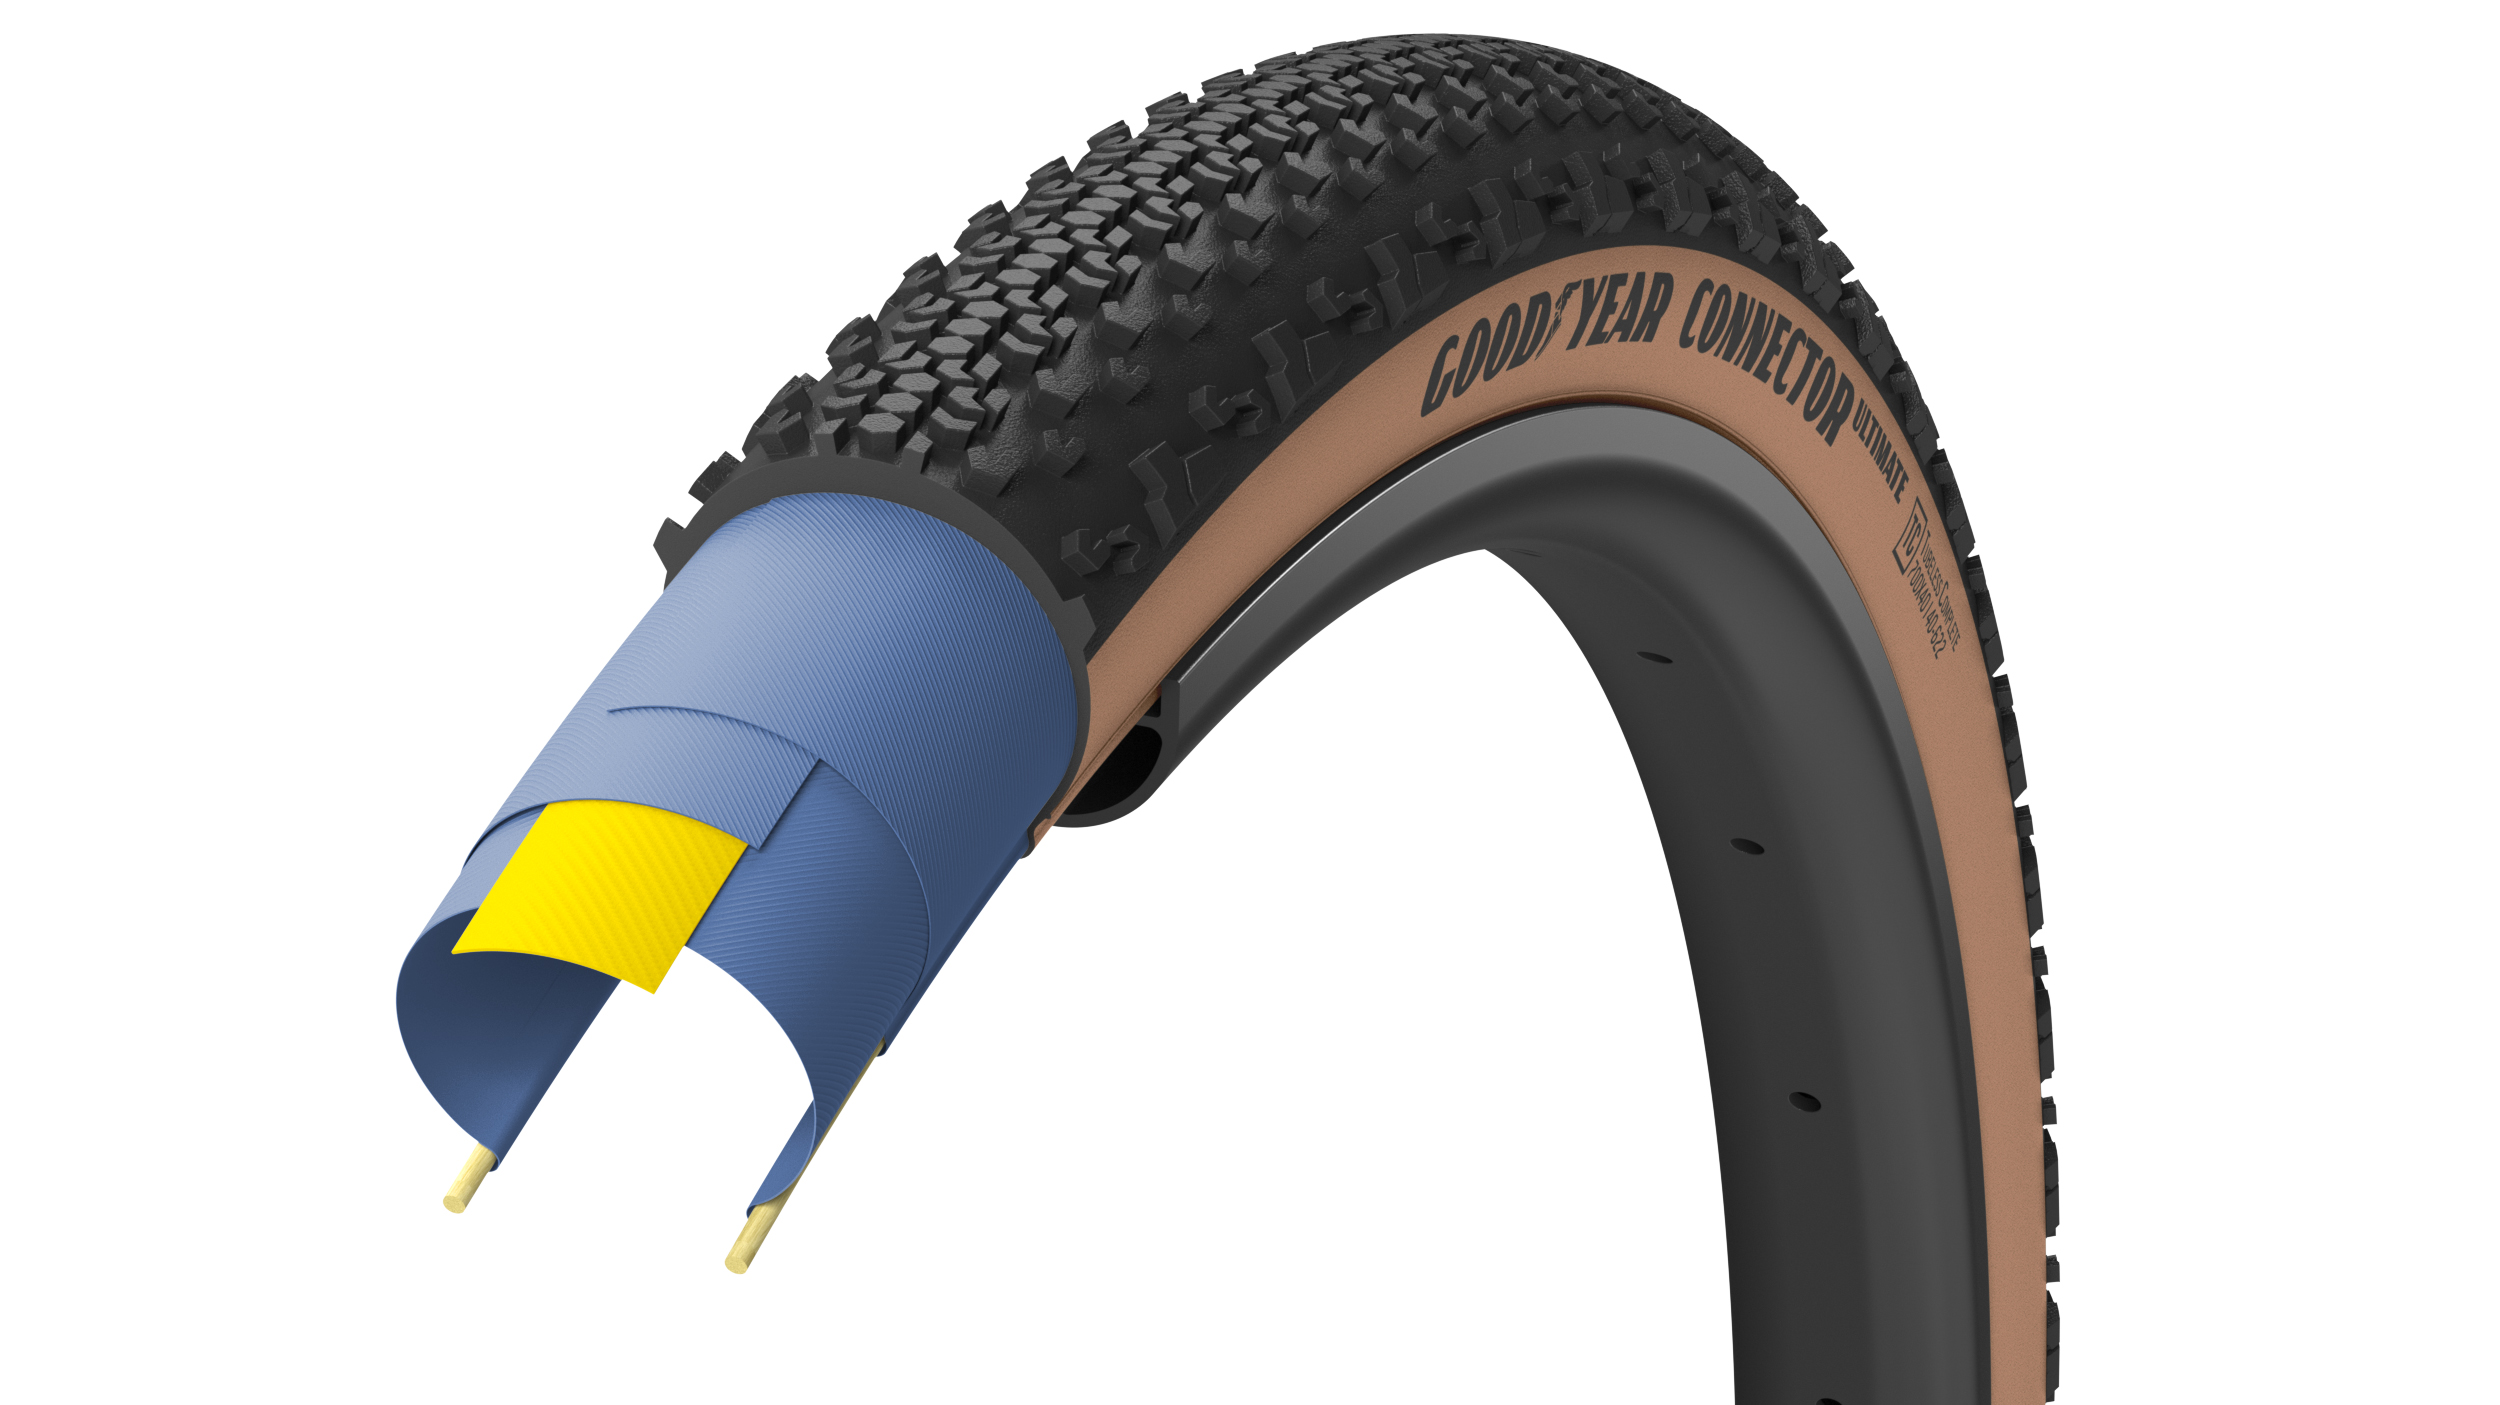 Покришка 700x35 (35-622) GoodYear CONNECTOR tubeless complete, folding, black/tan, 120tpi фото 